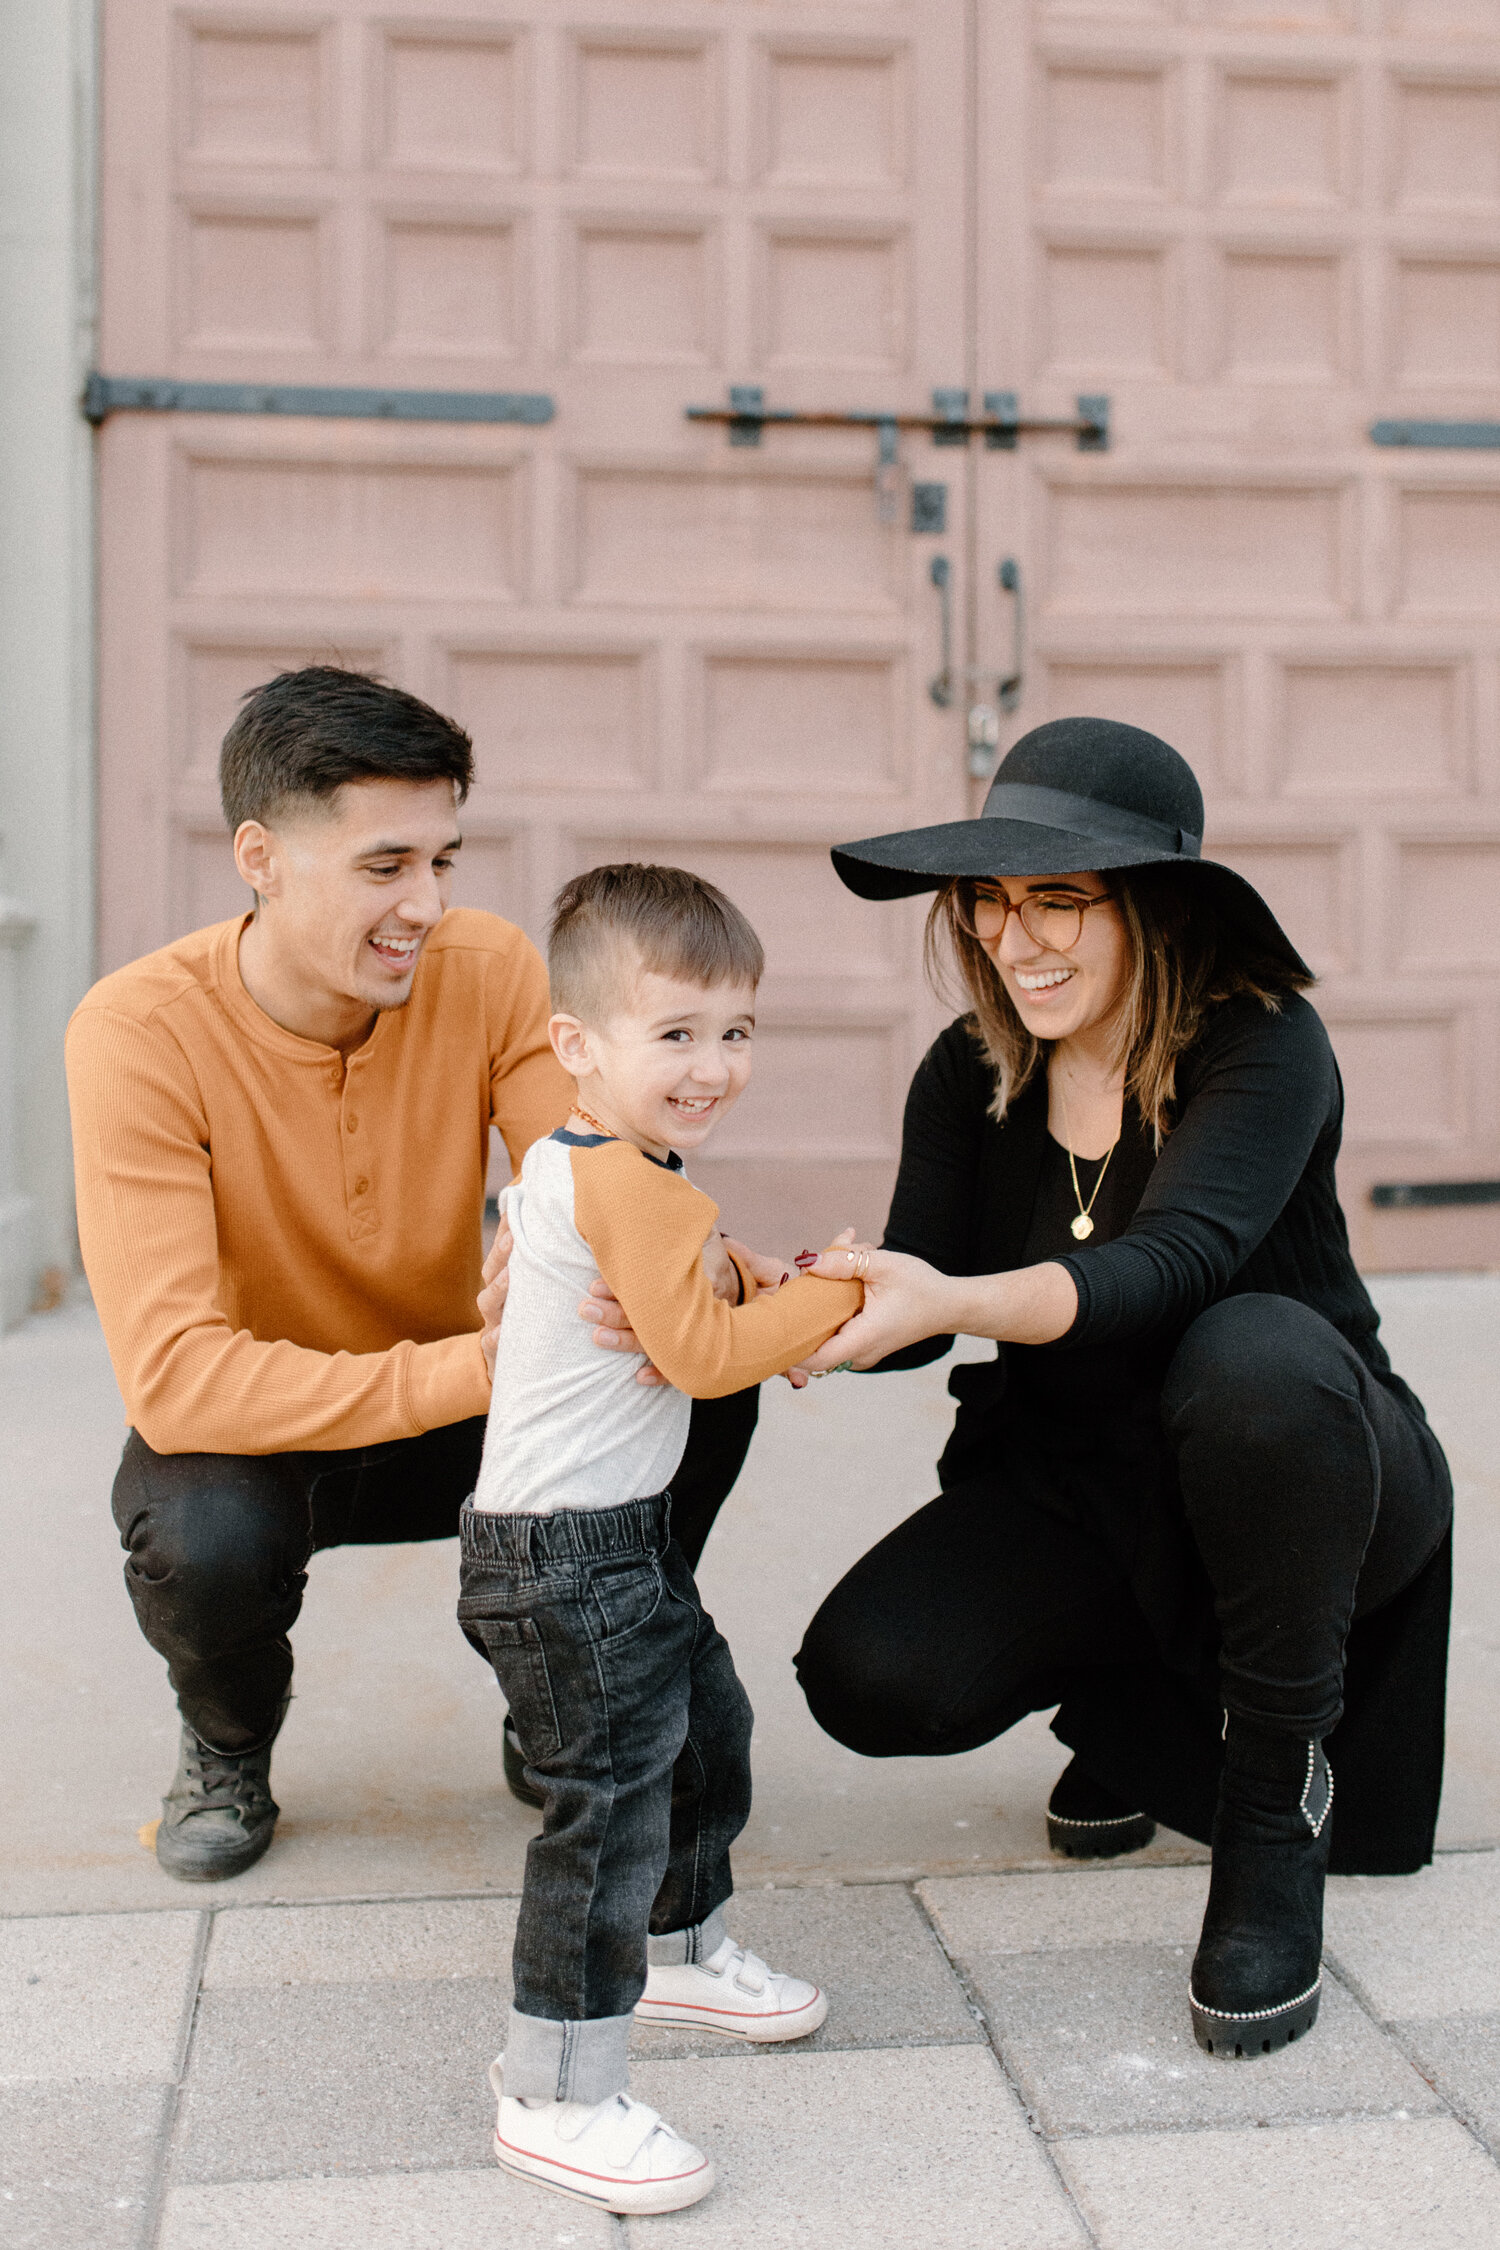  Ottawa, Canada’s Chelsea Mason Photography captures this family of three kneeling down and holding hands outside the Horticulture Building. urban engagement session location ottawa canada orange and black family photo outfit colors laughing family w